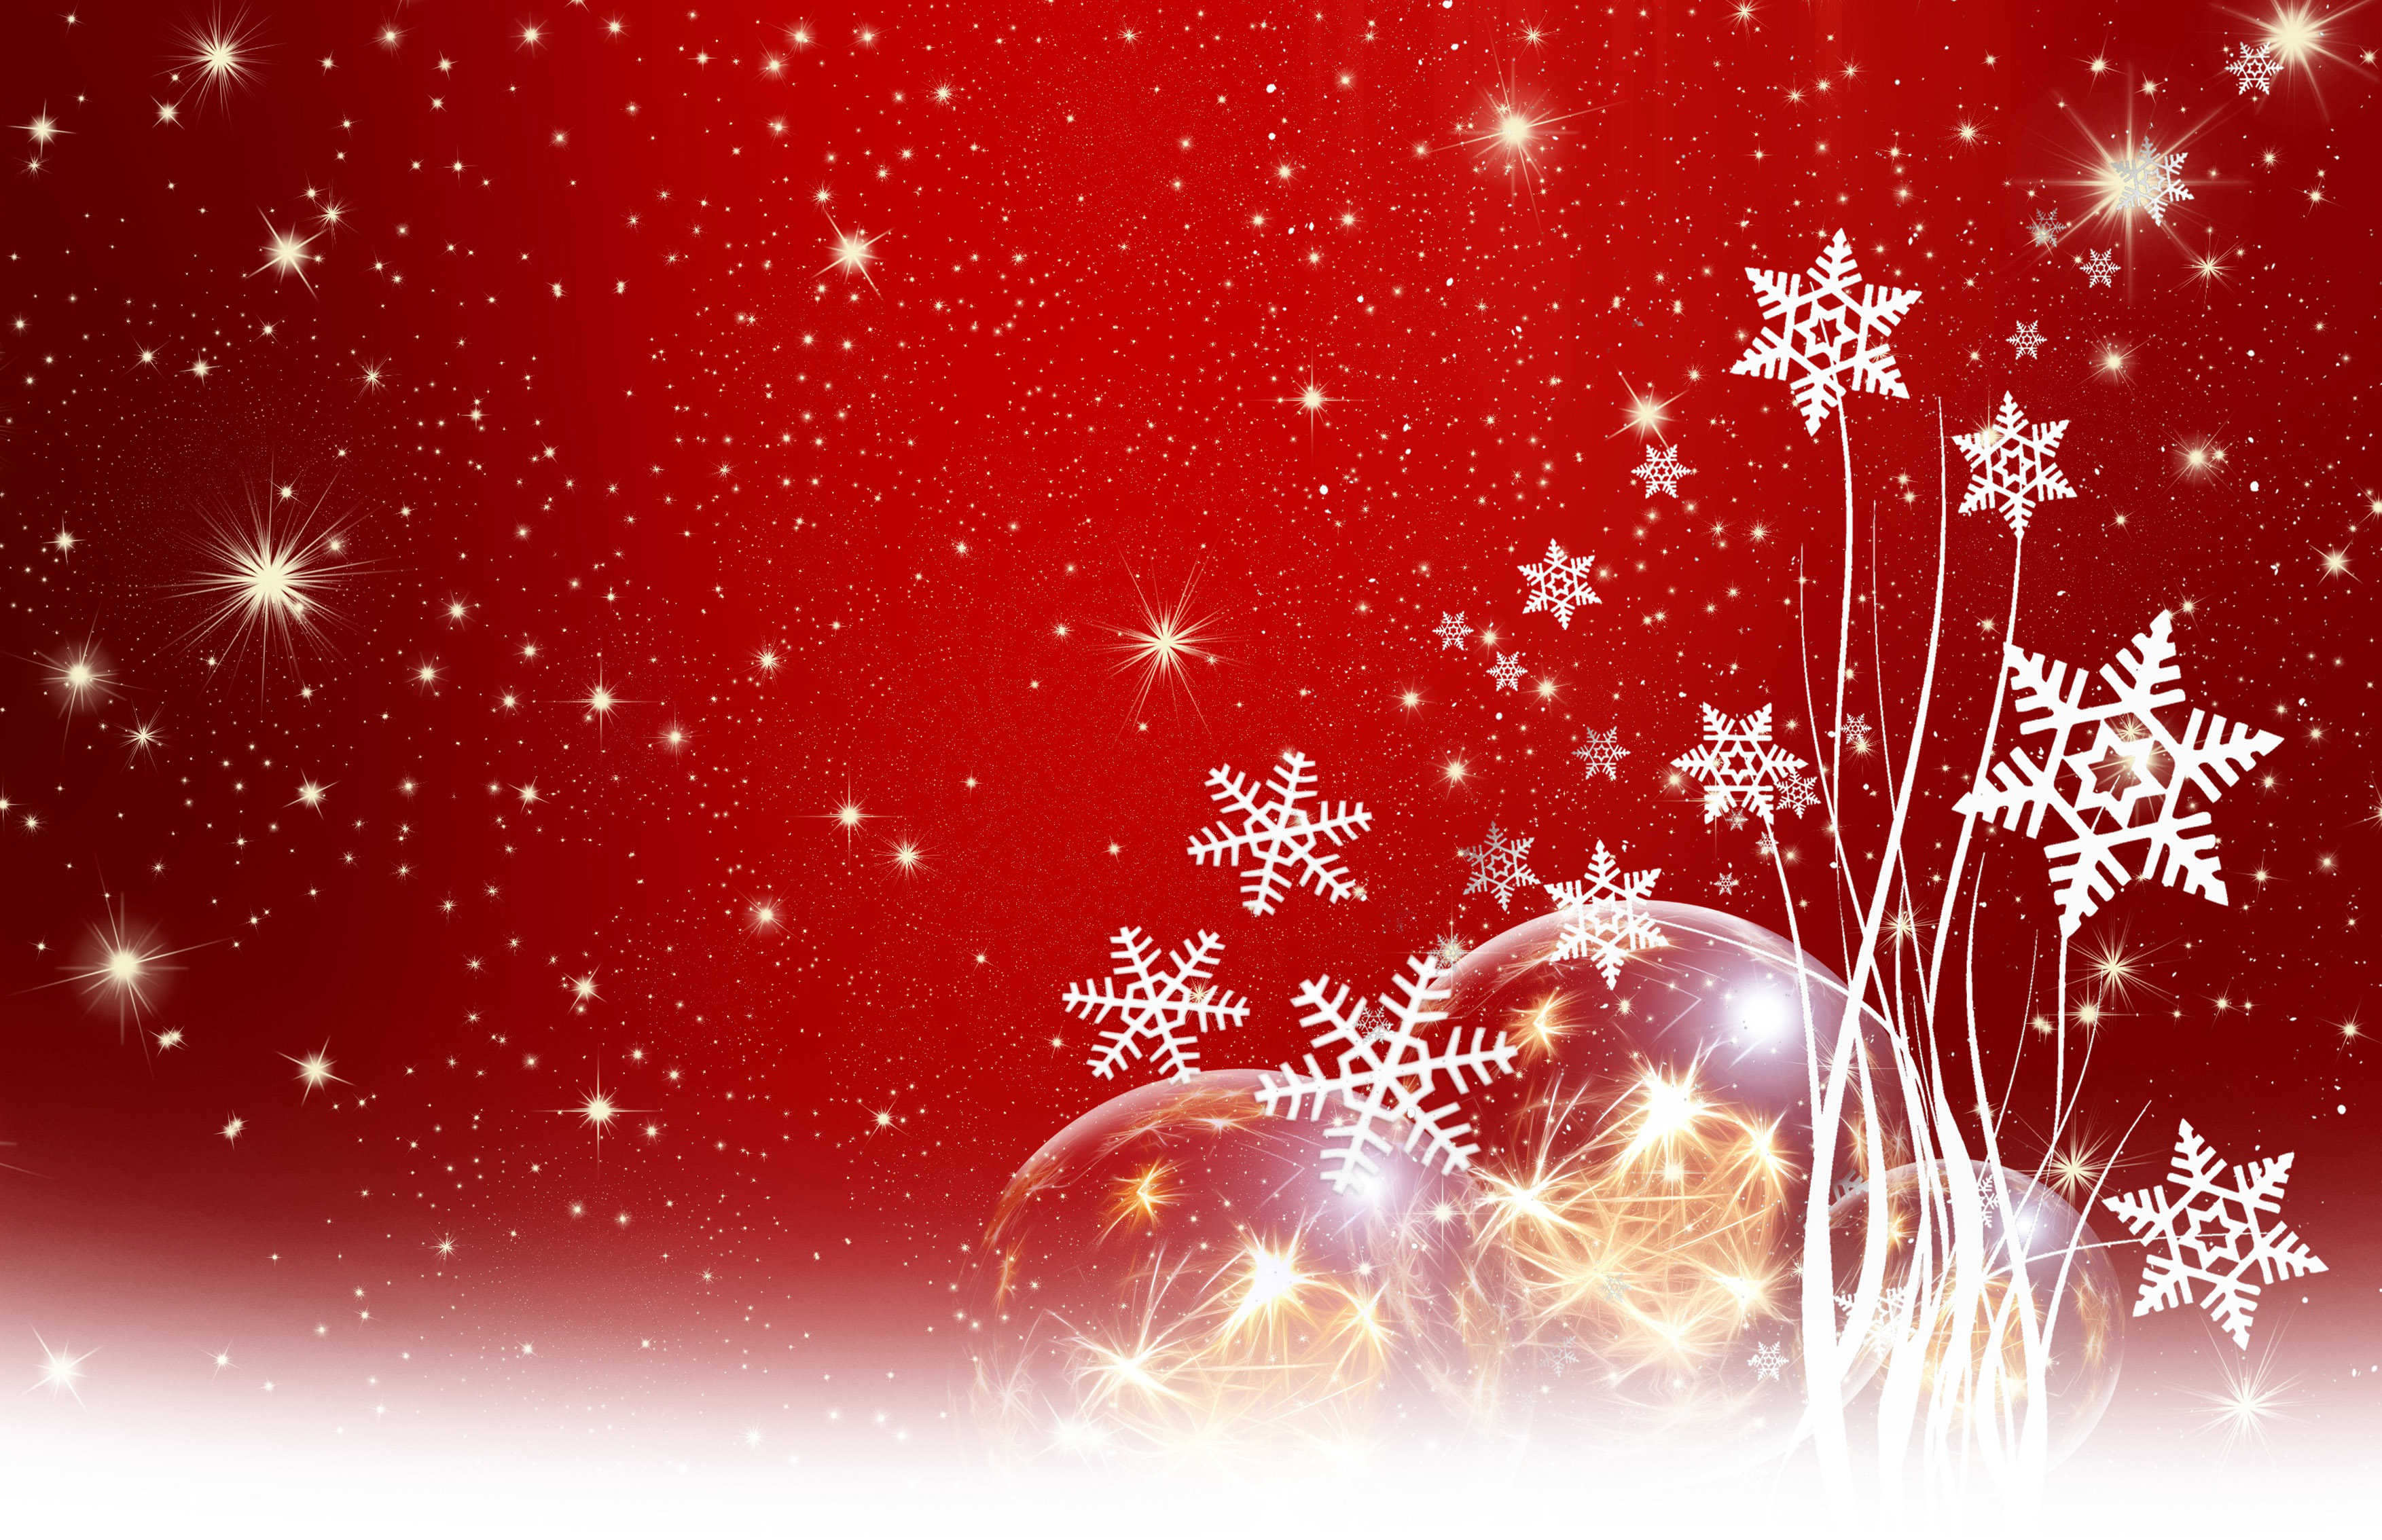 Silver And Red Christmas Background Image Amp Pictures Becuo